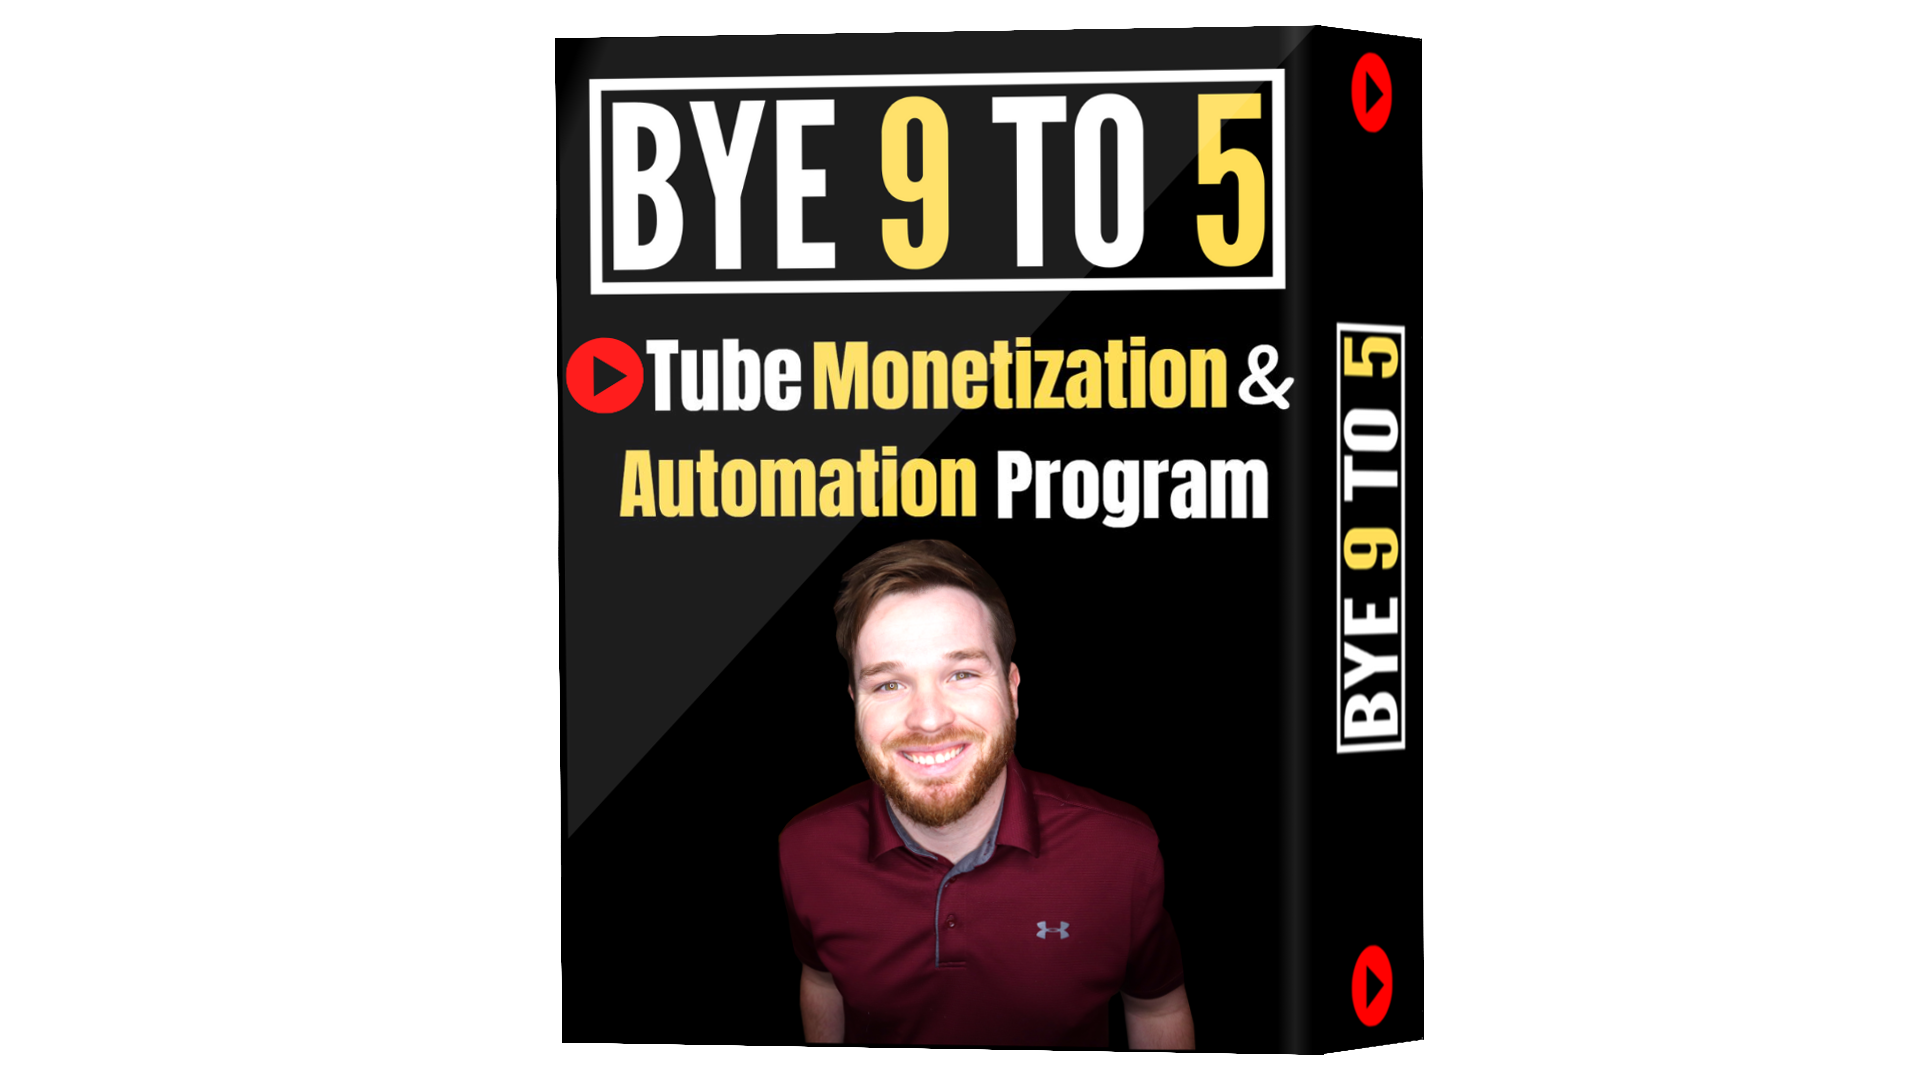 Bye 9 To 5 Course - Make Money On YouTube Without Making Videos |